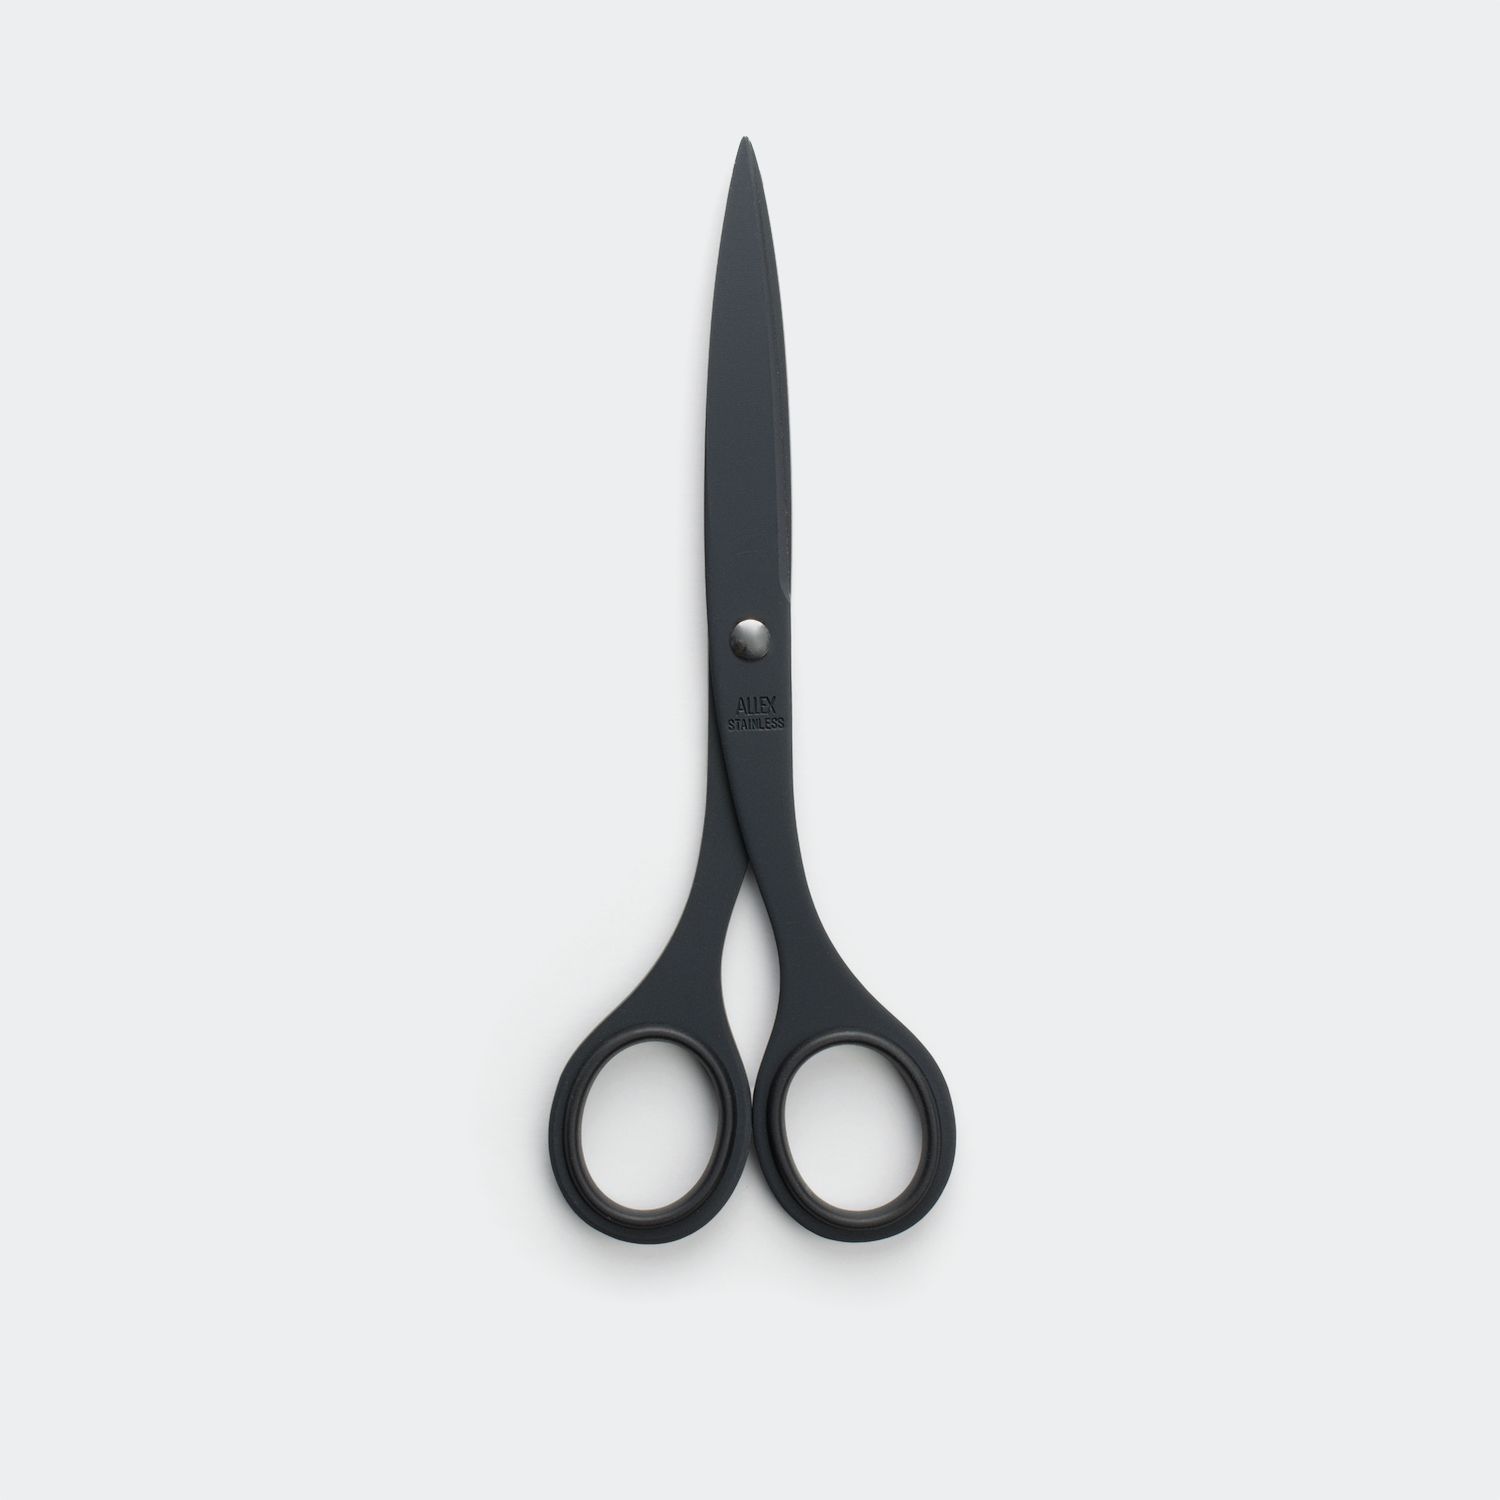  ALLEX Black Office Scissors for Desk, Medium 6.5 All Purpose  Non Stick Scissors, Made in JAPAN, All Metal Sharp Japanese Stainless Steel  Blade with Non-Slip Soft Ring, Black : Office Products